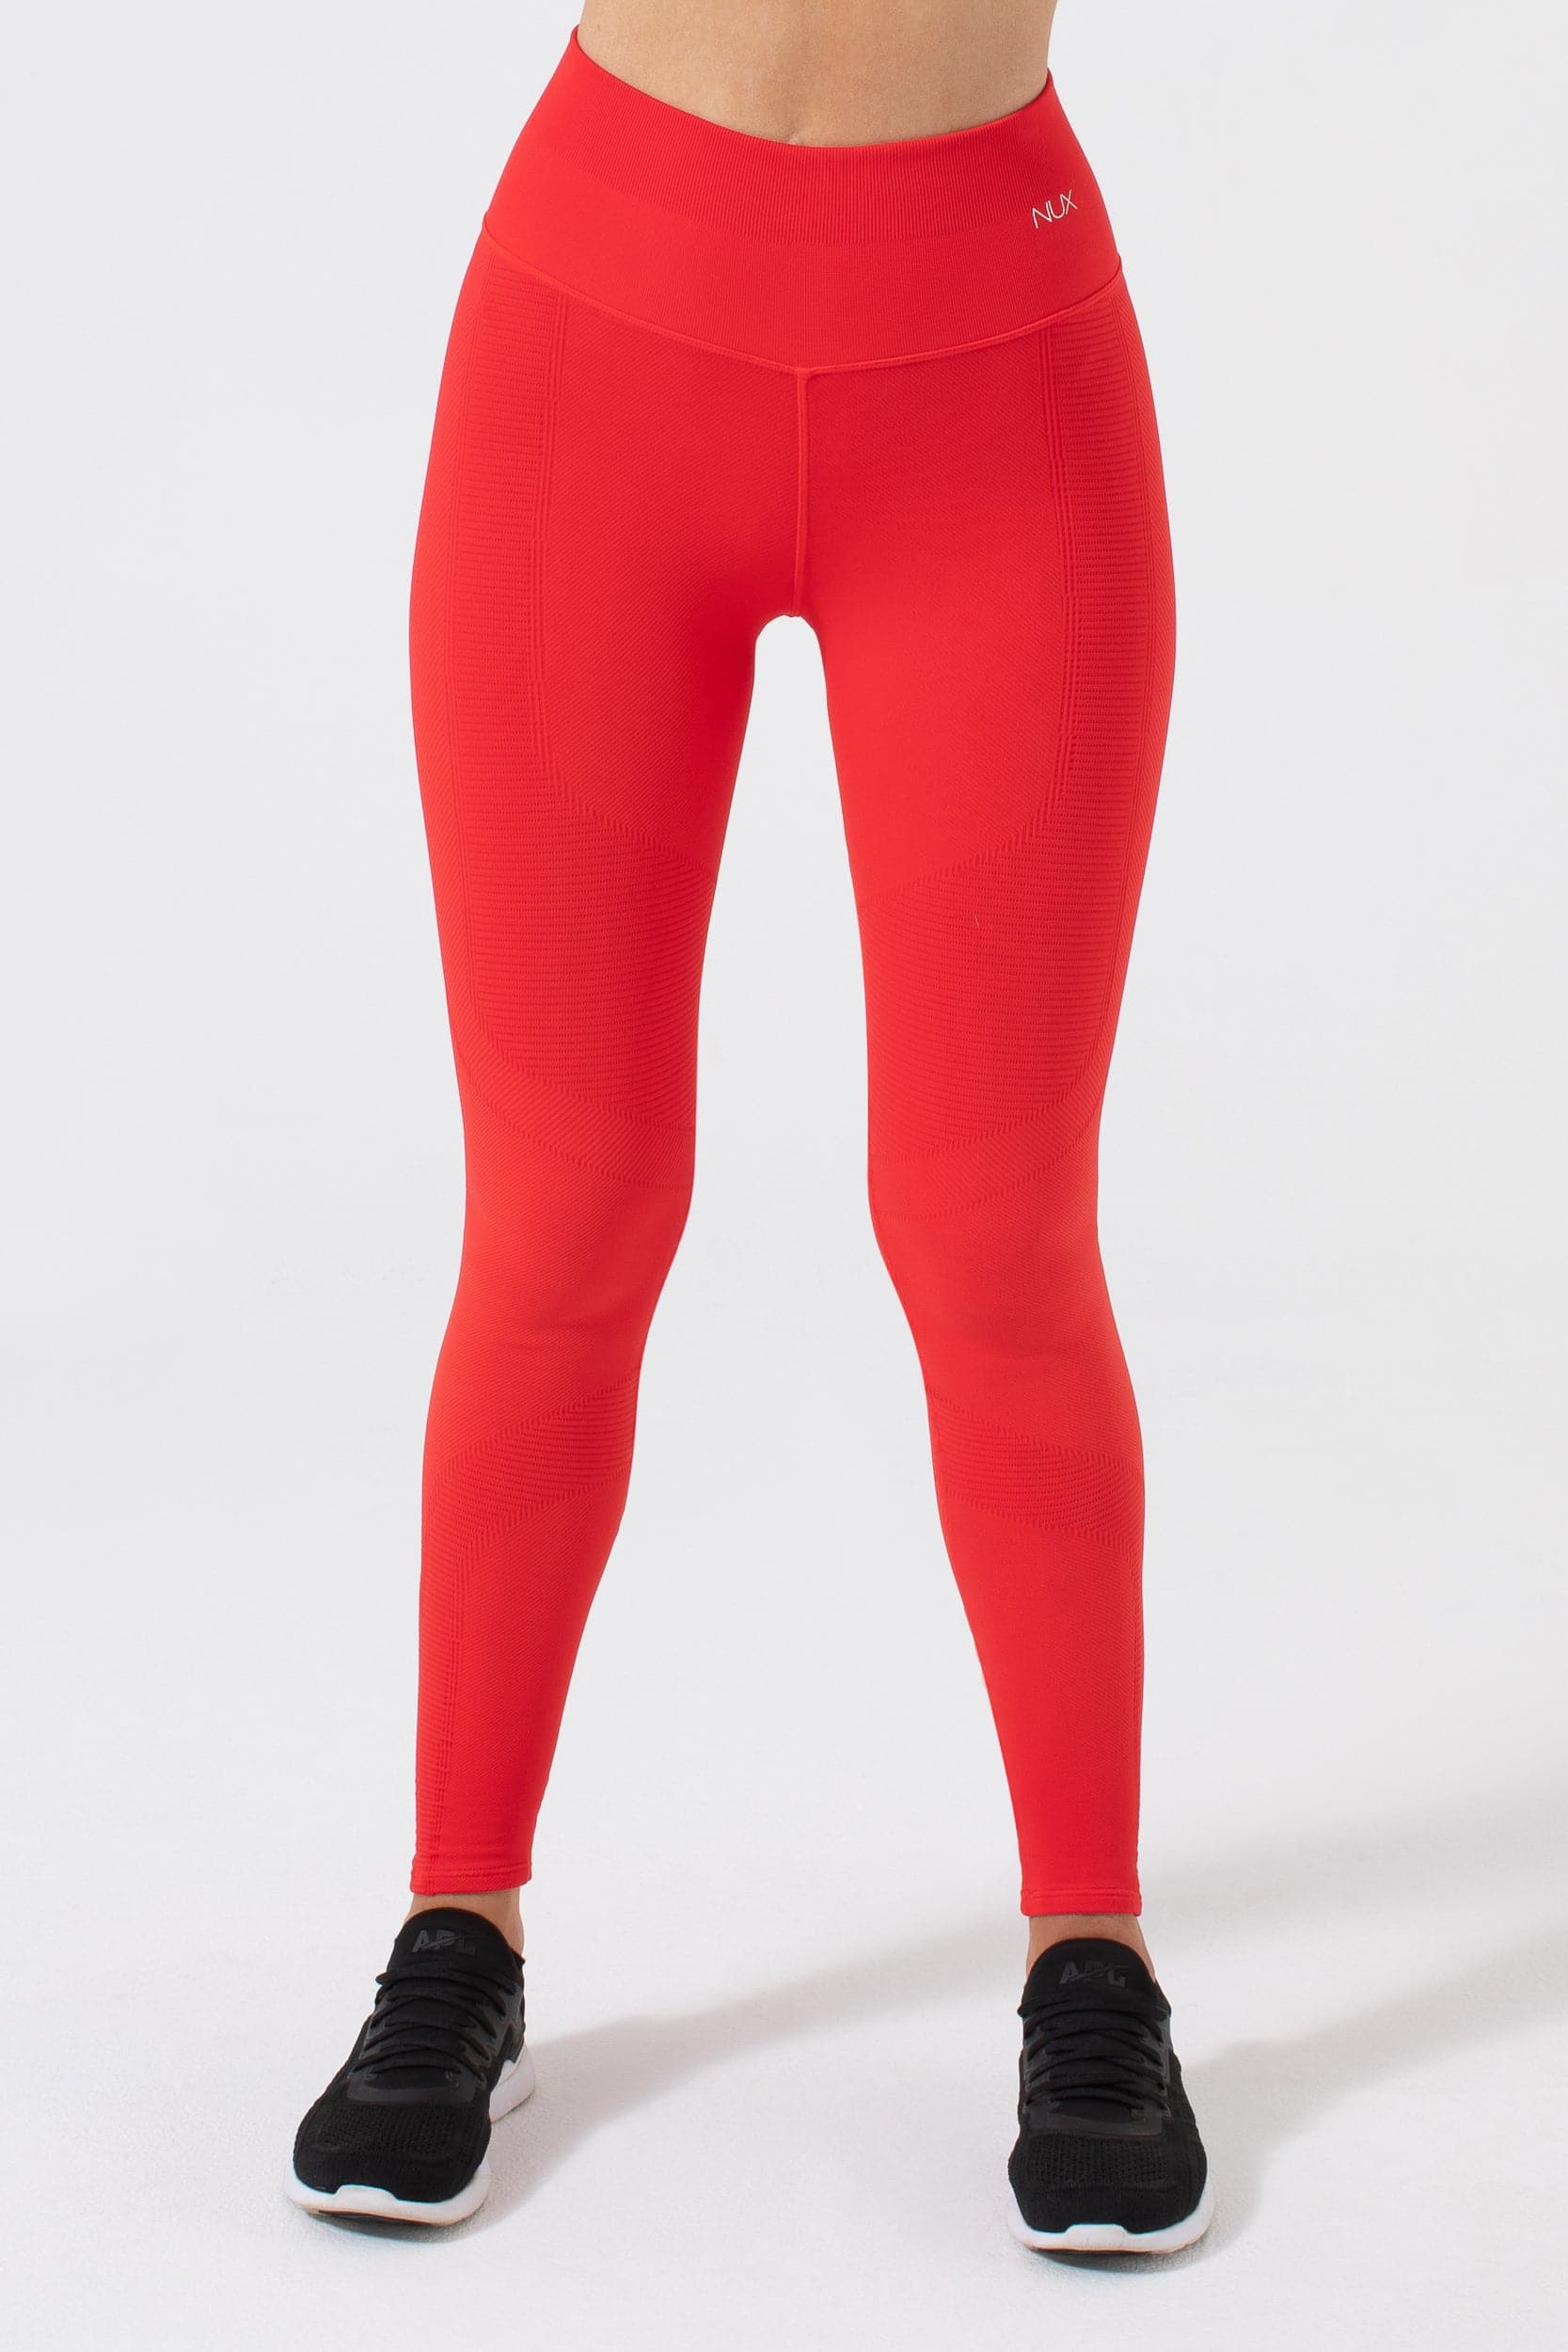 Nux One by One Legging for Pre or Post Gym Workout - Acenla